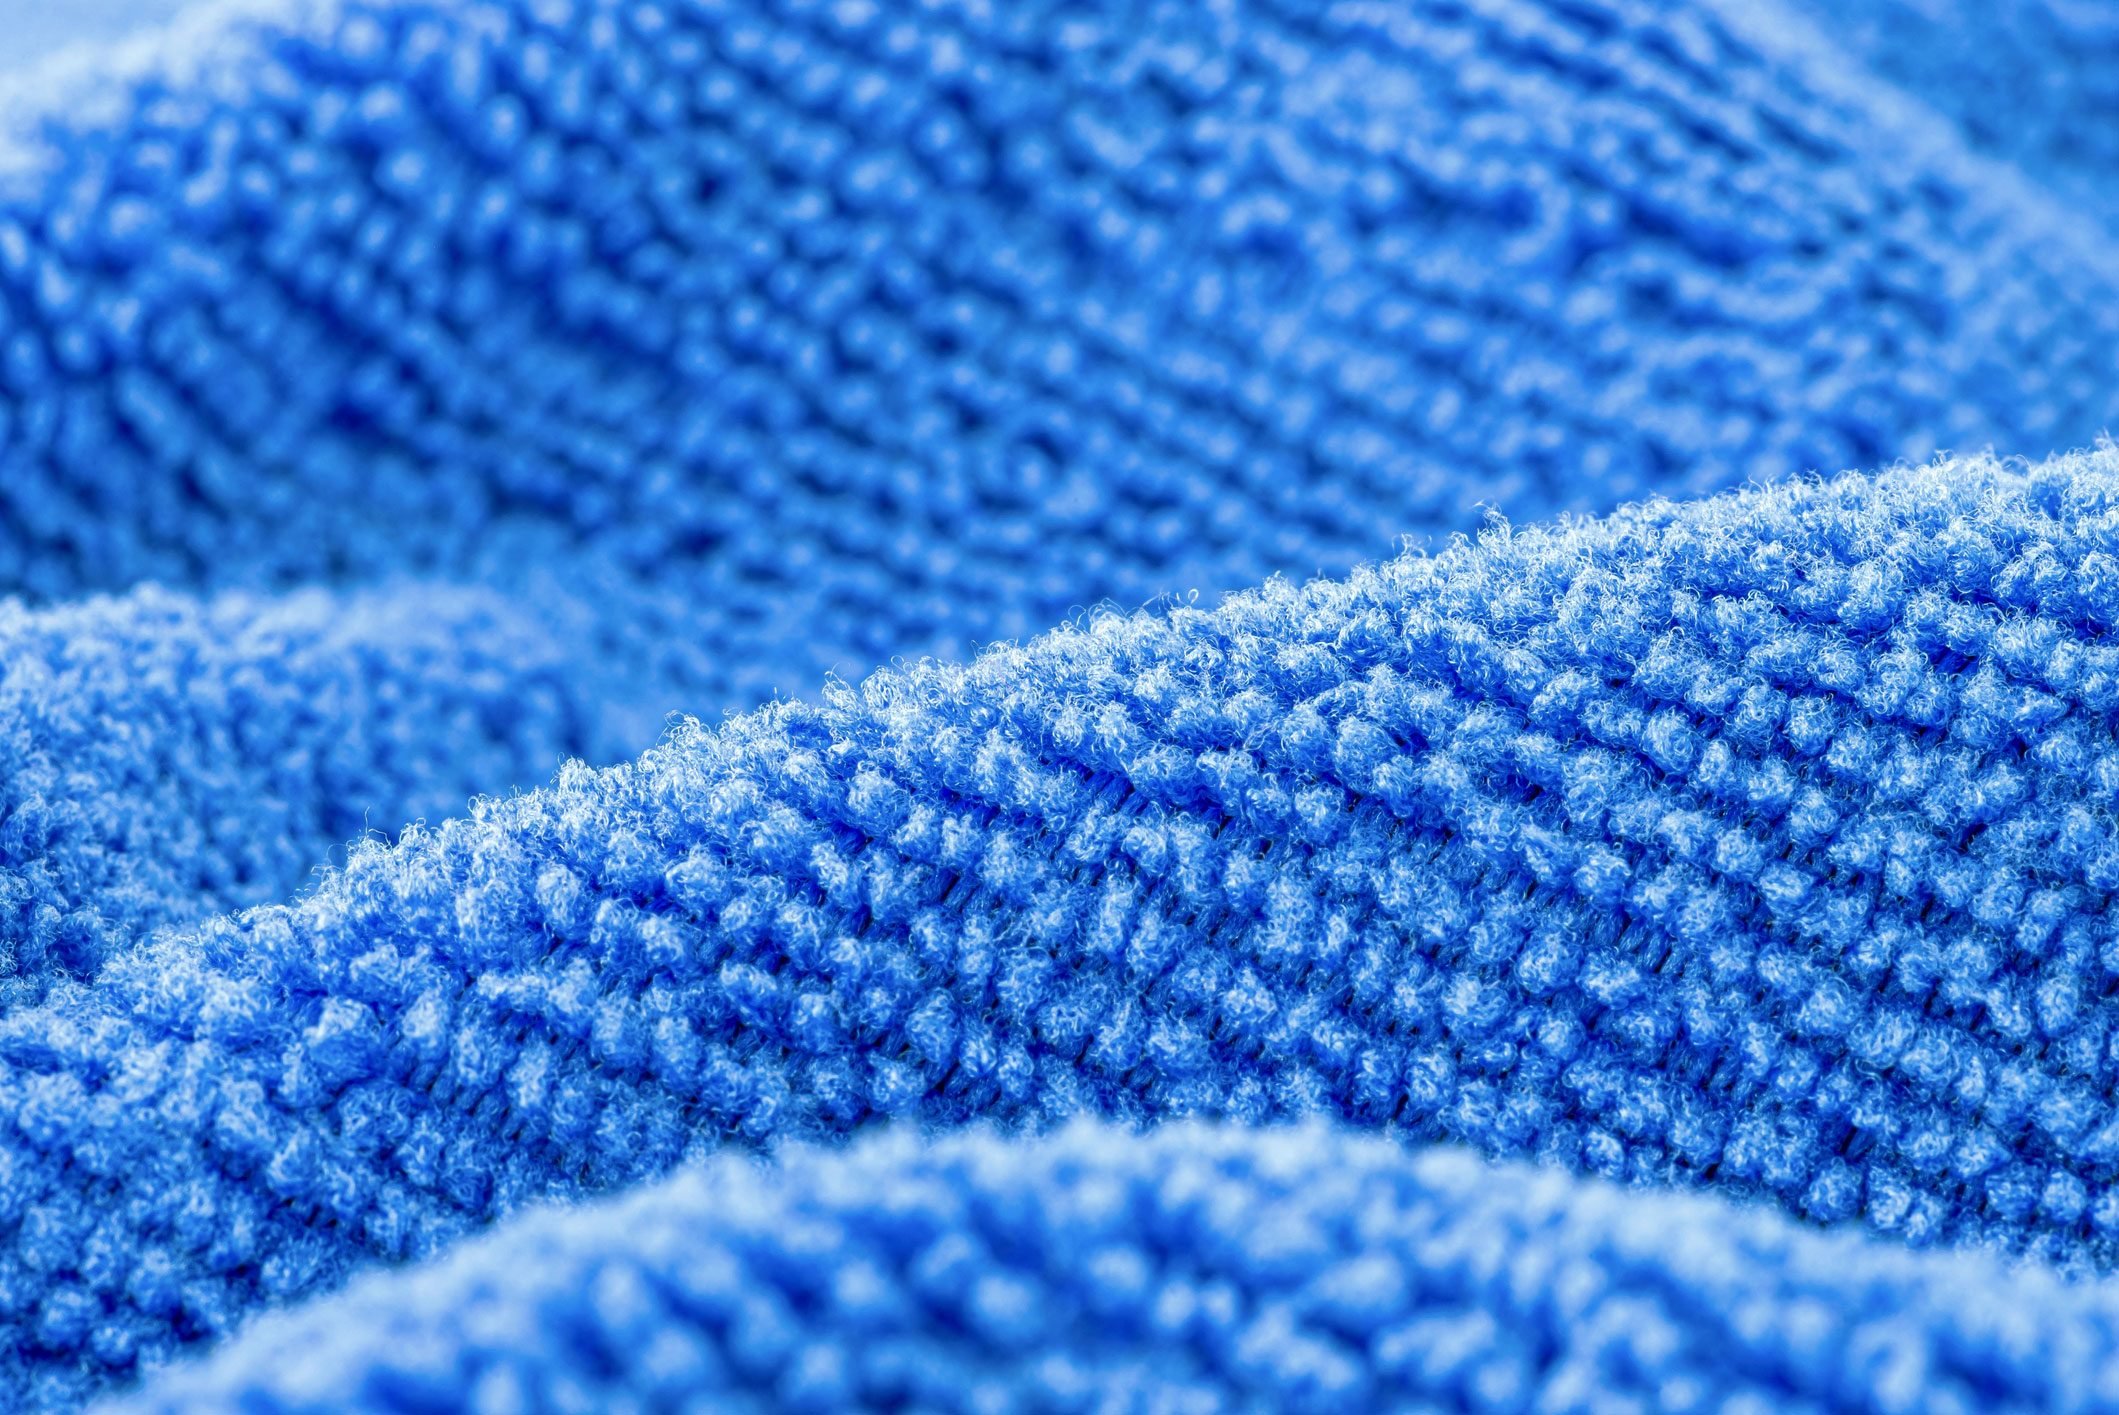 What Are Microfiber Cleaning Cloths and How Do They Work?